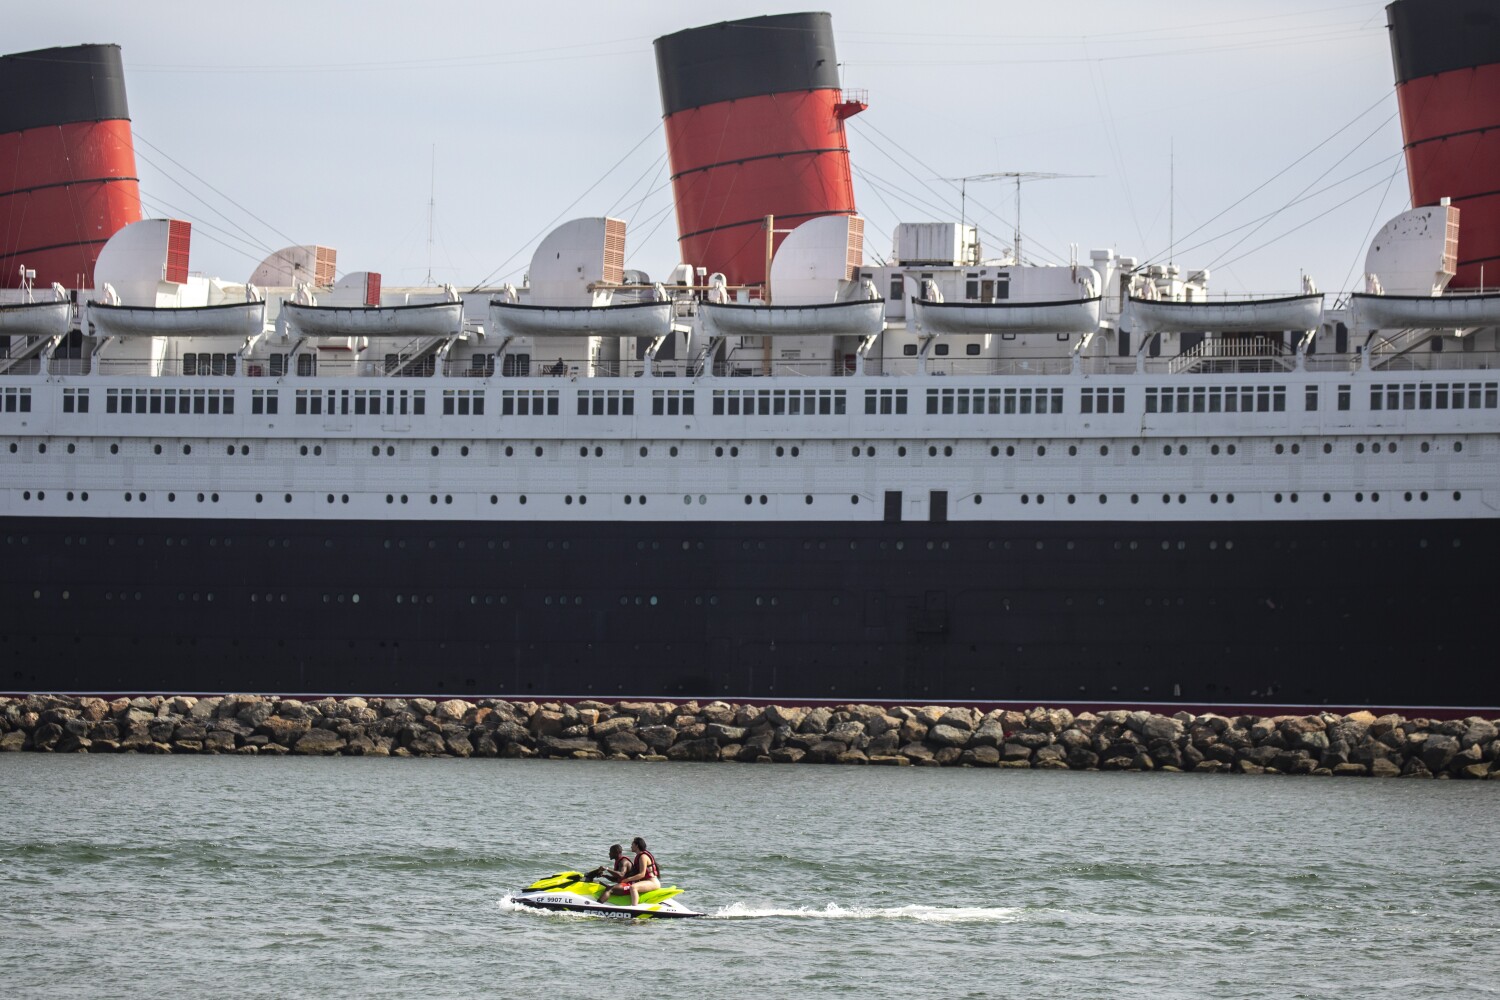 Looking to buy a piece of Queen Mary history? Nows your chance